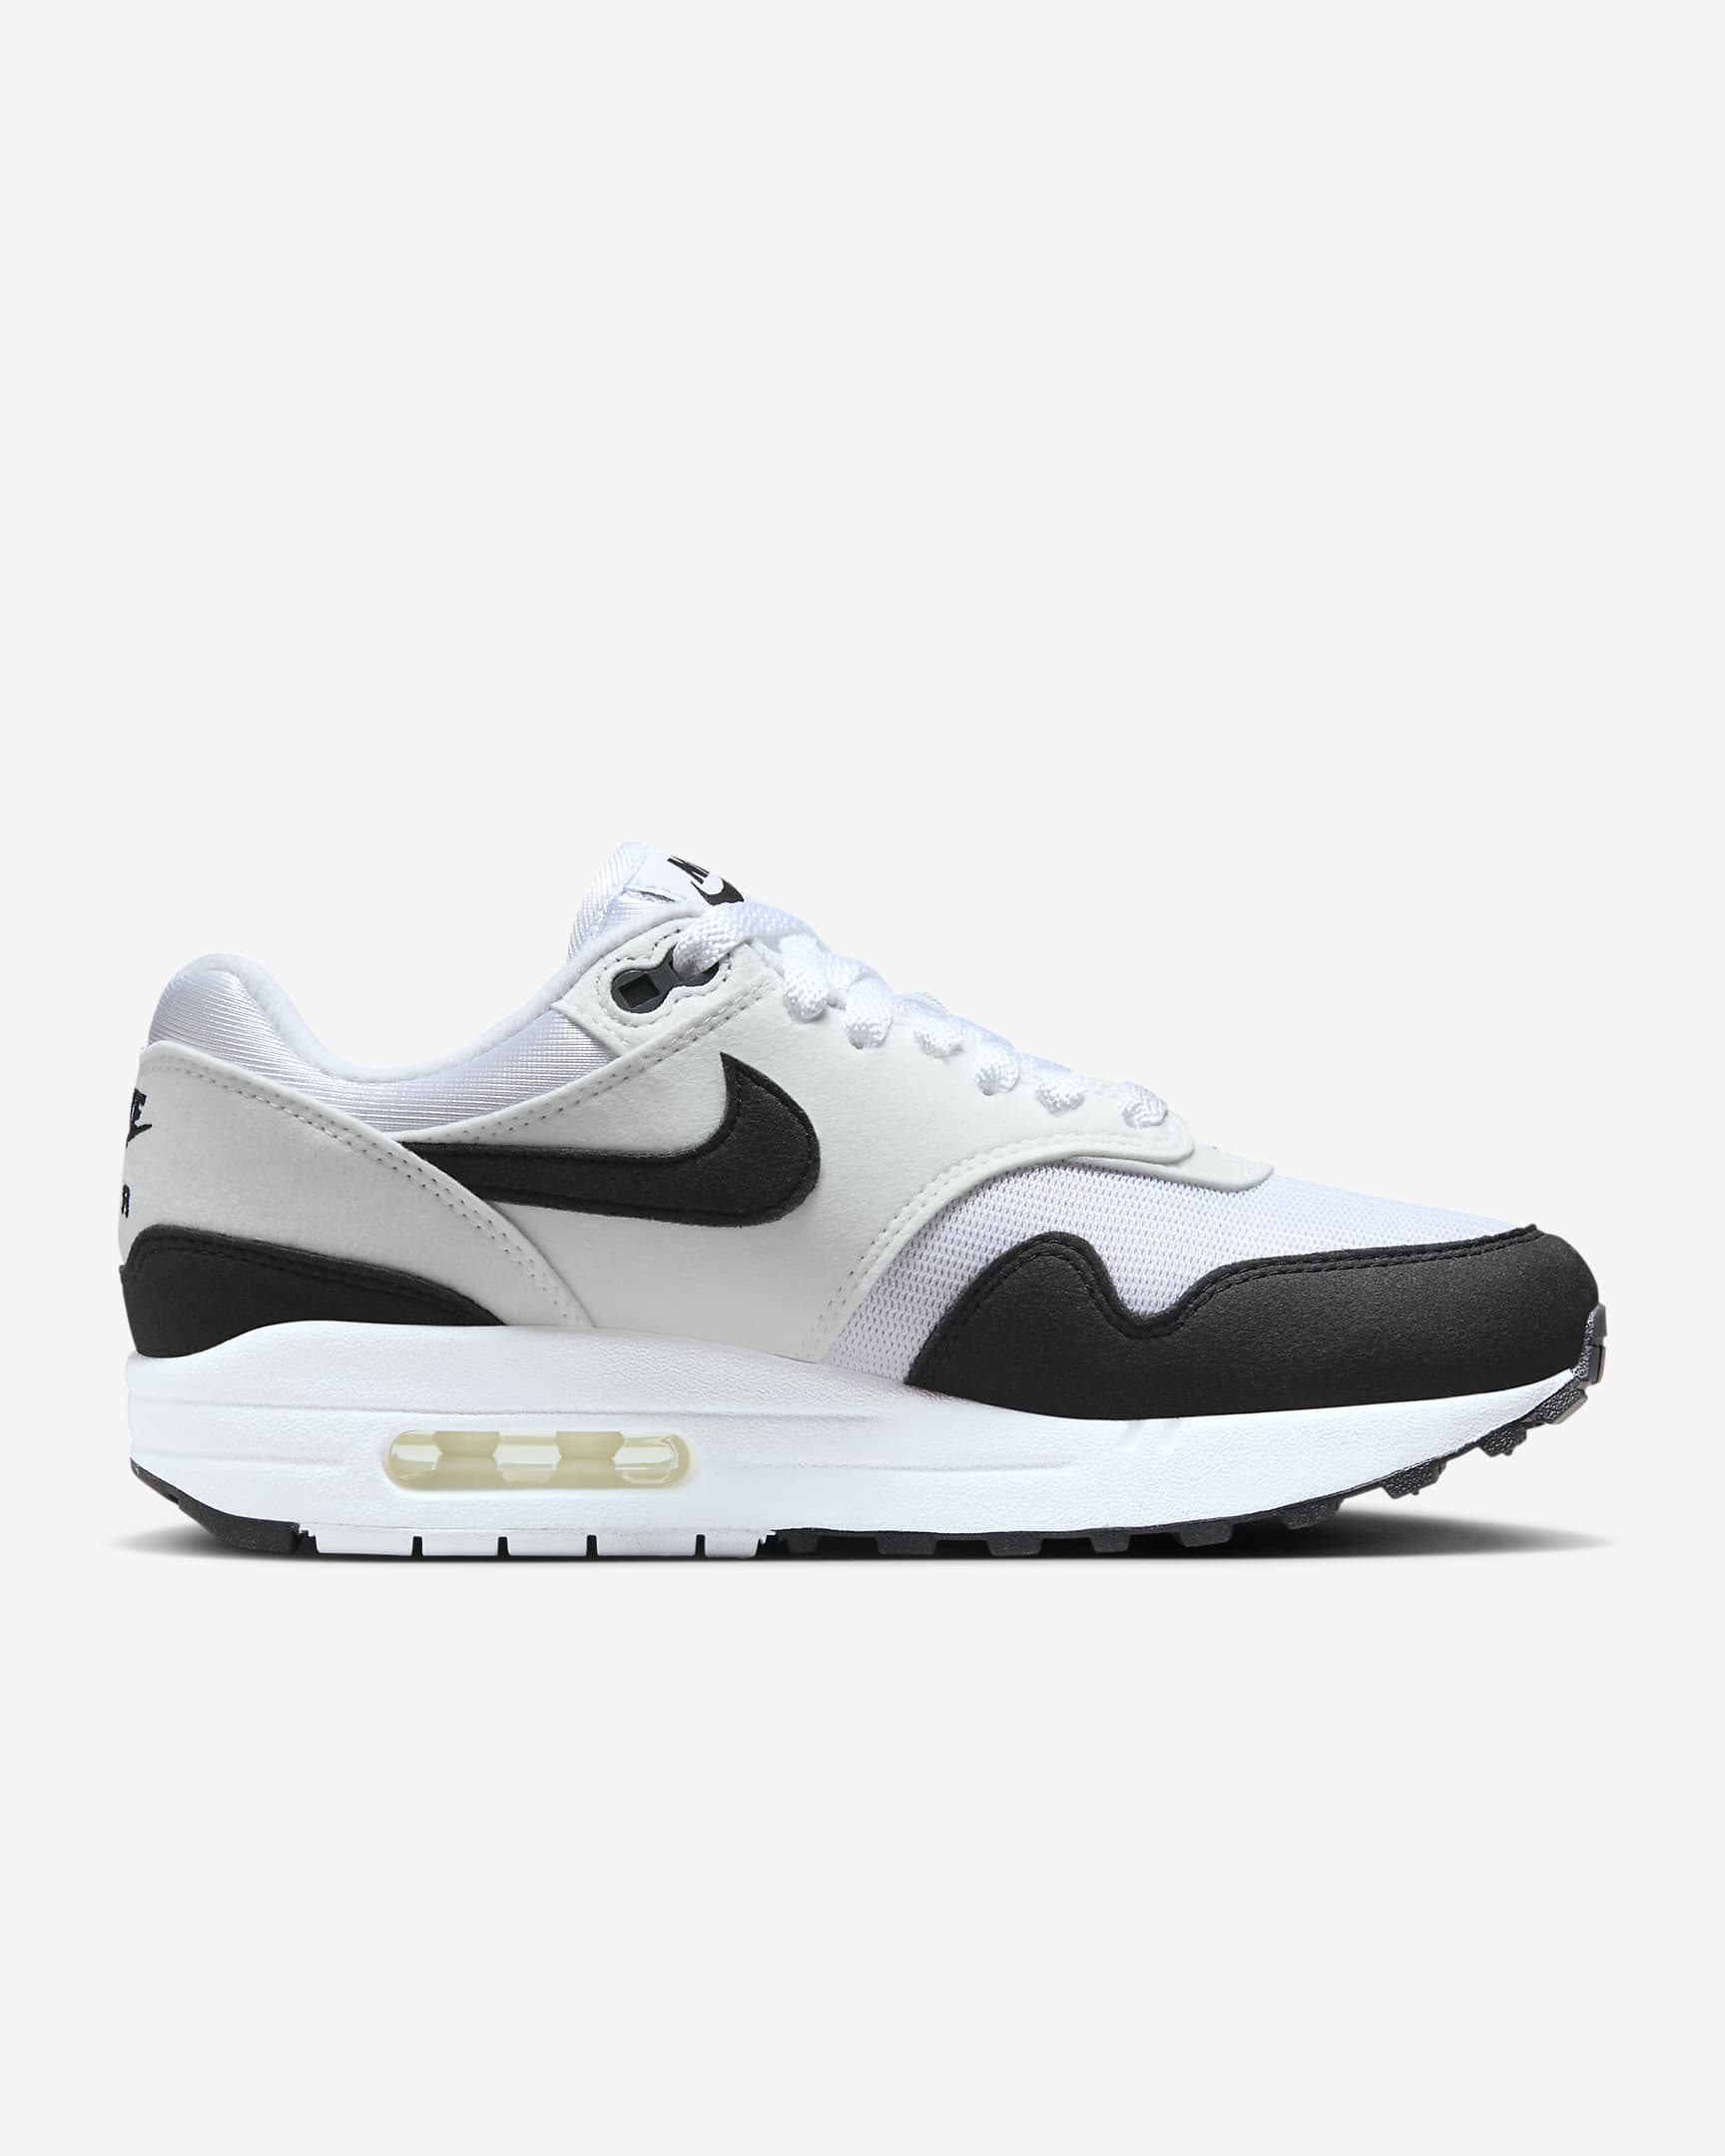 Is This the Most Comfortable Nike Air Max 1 Women’s Shoe Ever? Find Out Inside!